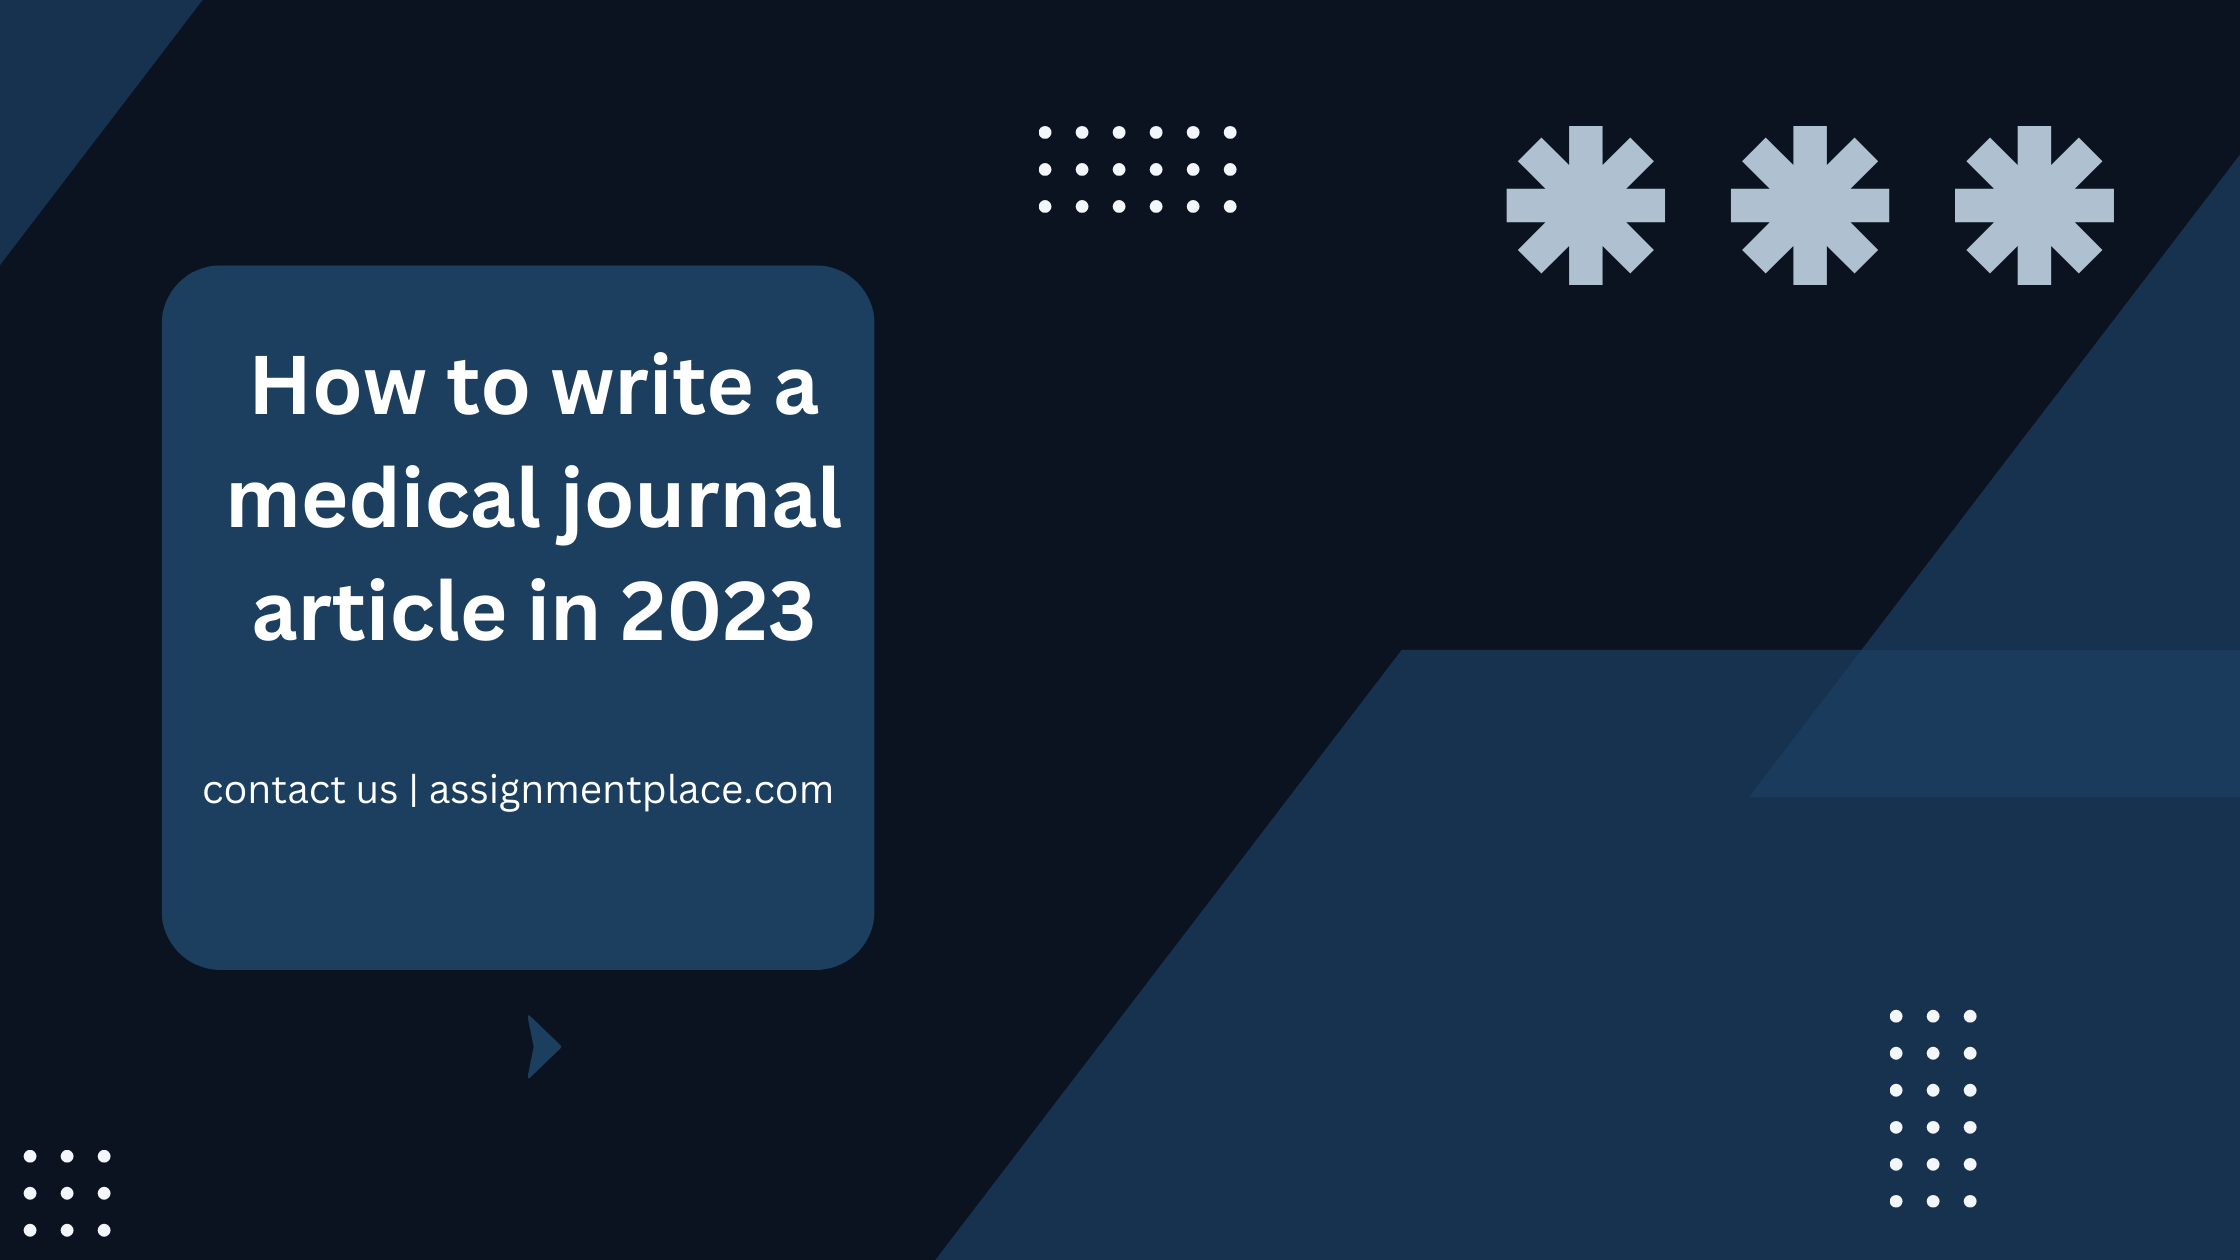 You are currently viewing How to write a medical journal article in 2023